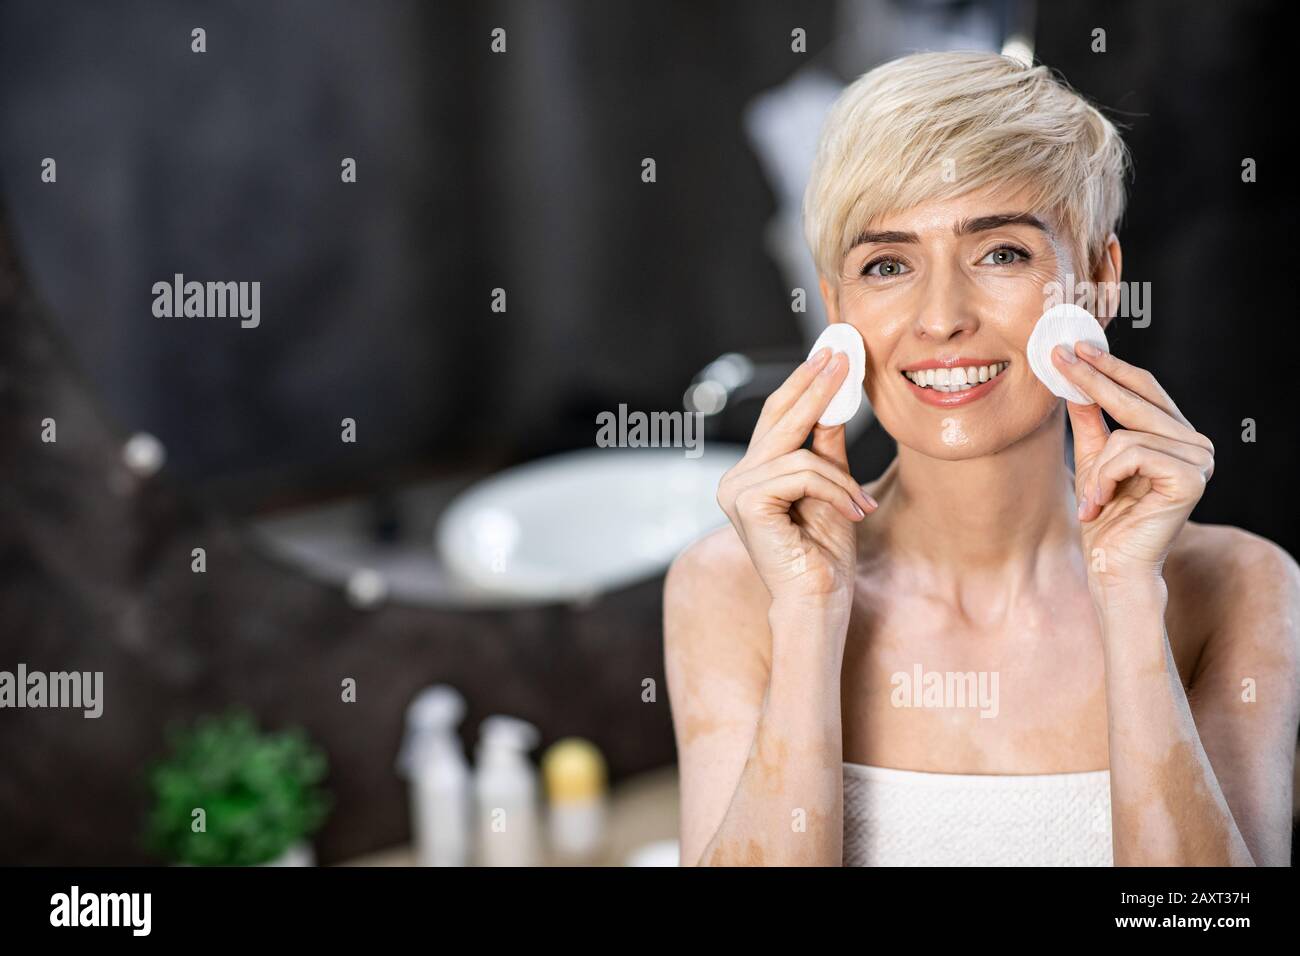 Lady Holding Cotton Pads Near Face Smiling Standing In Bathroom Stock Photo